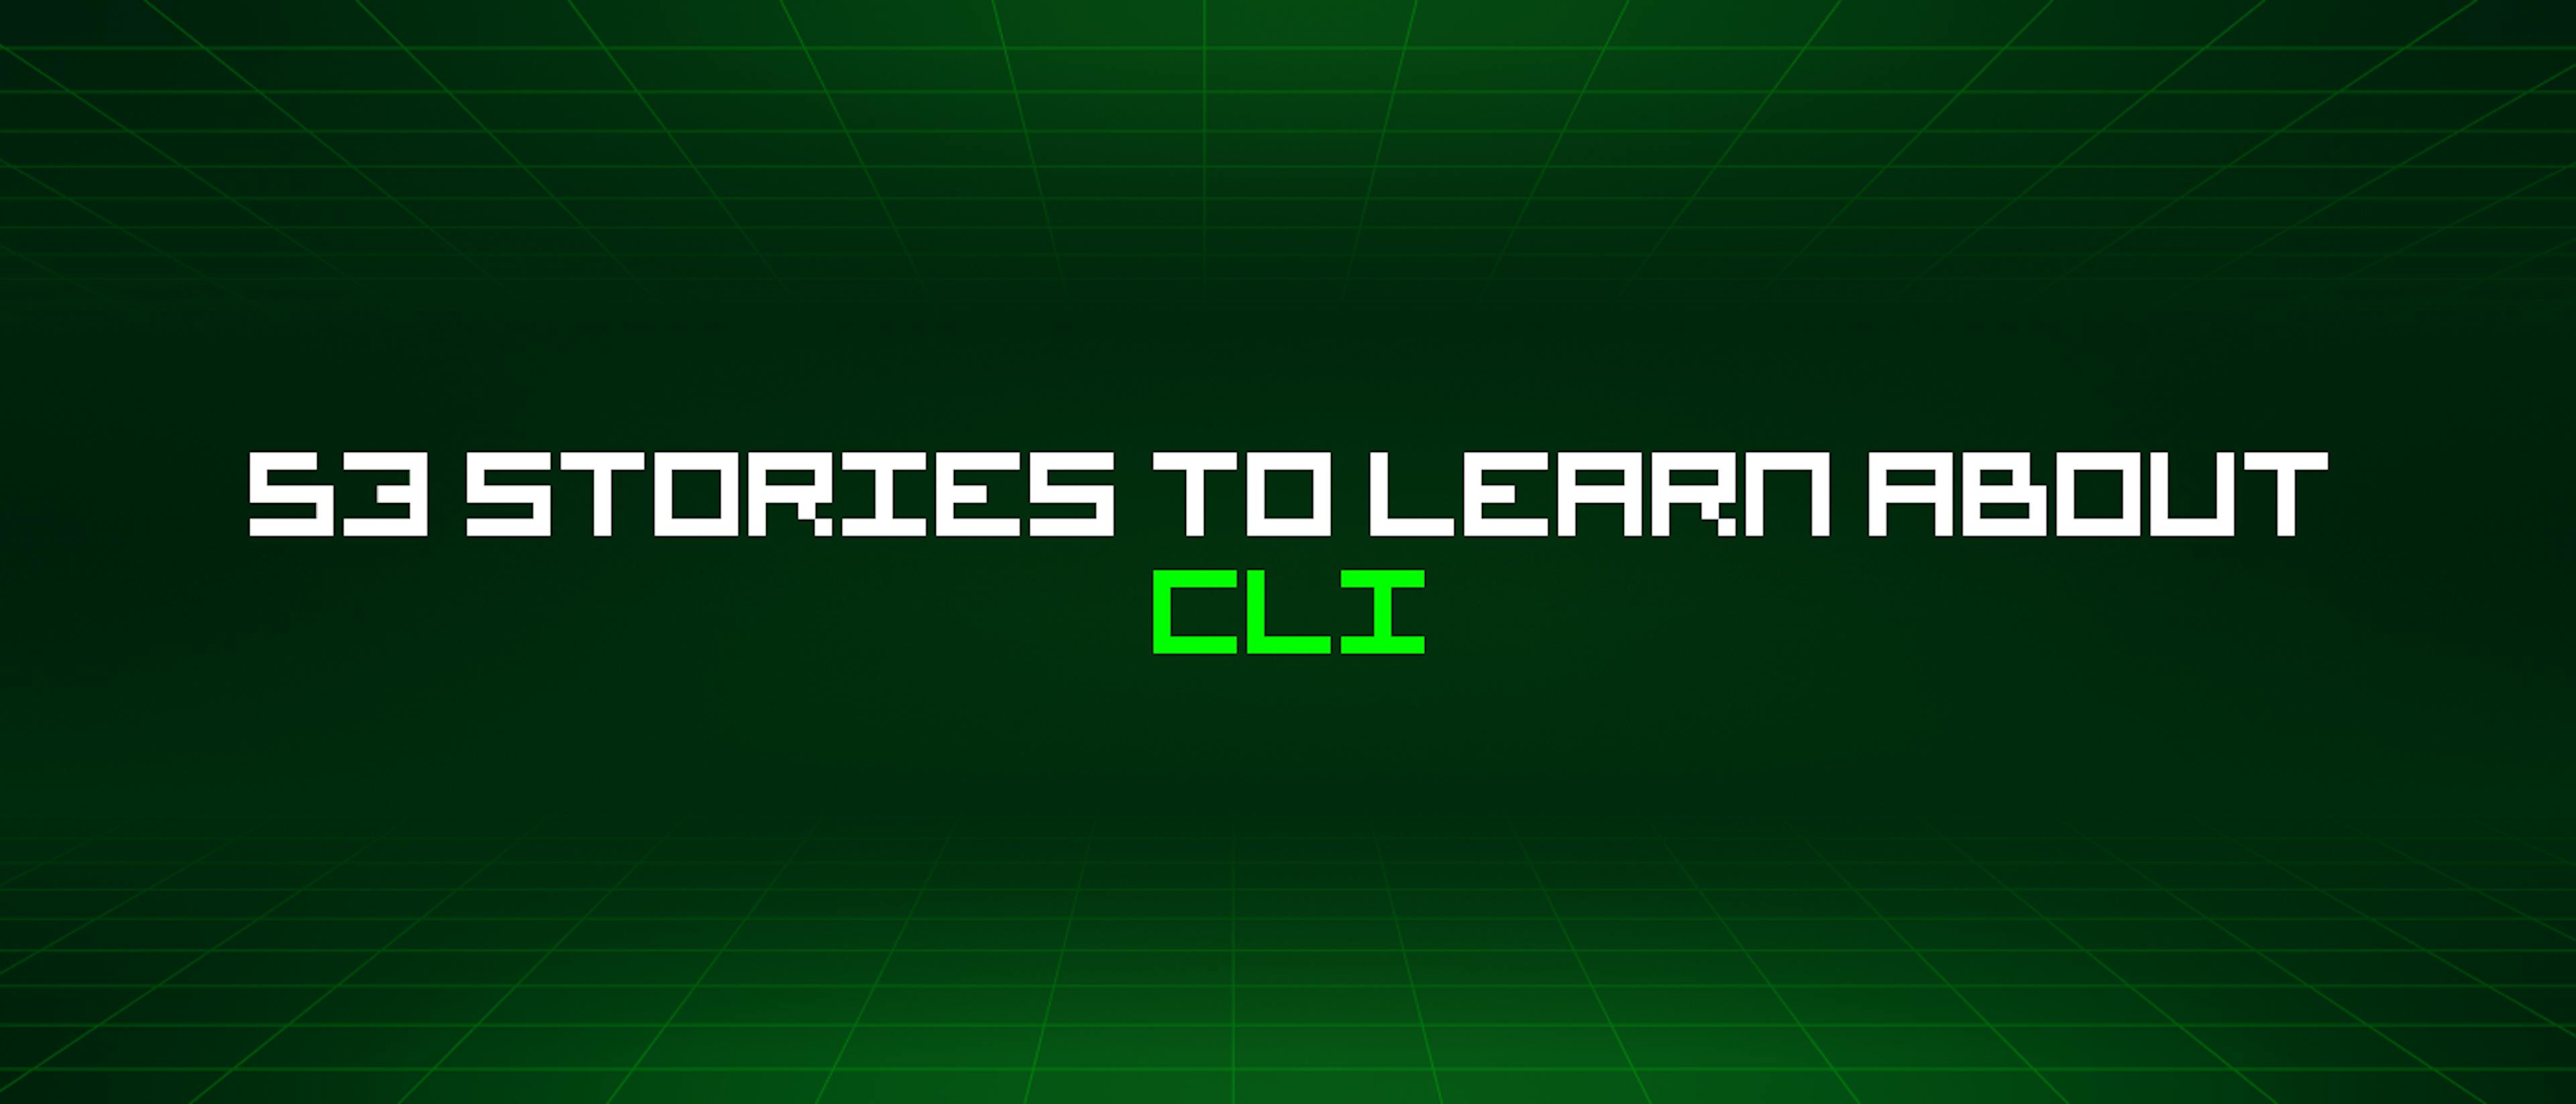 featured image - 53 Stories To Learn About Cli